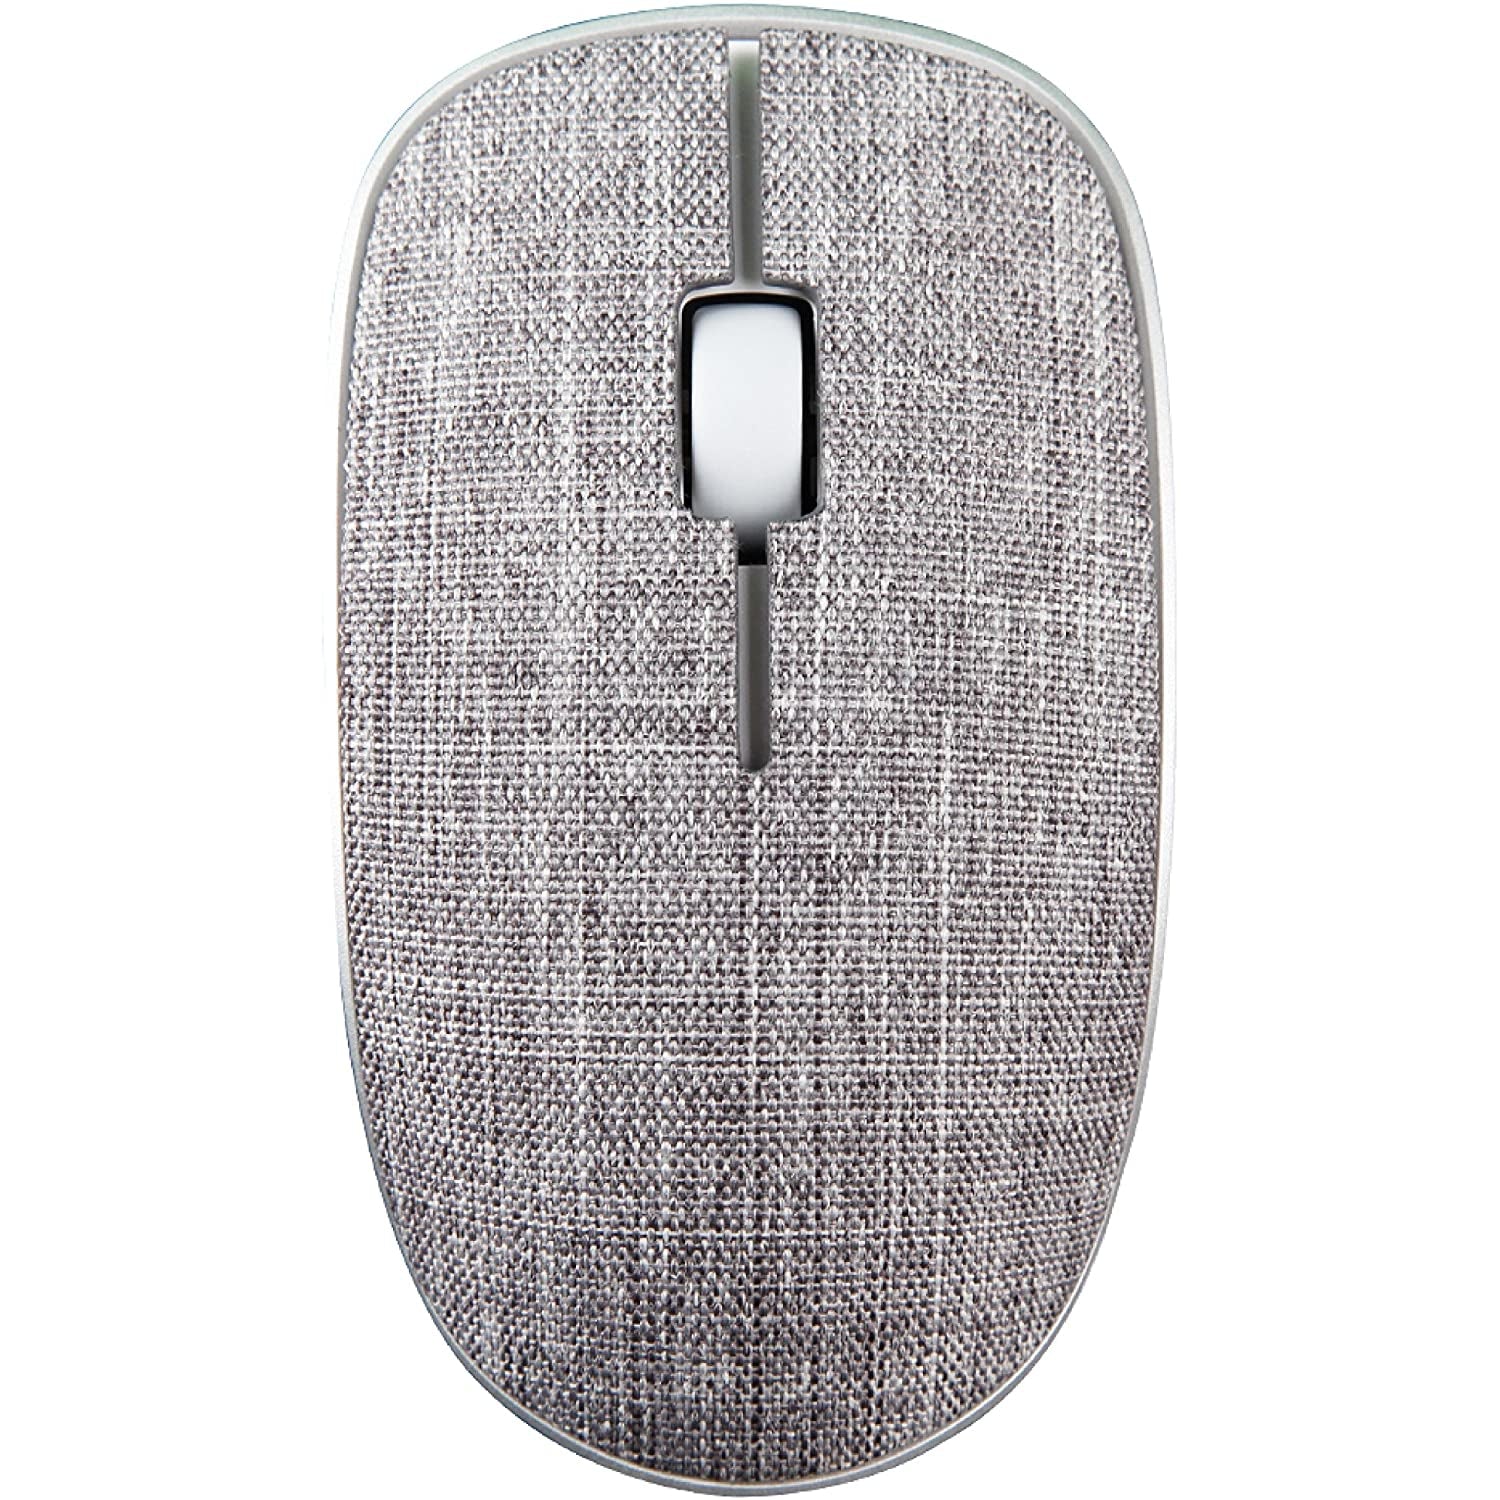 Rapoo 3510 Plus 2.4GHz Wireless Optical Fabric Mouse Grey